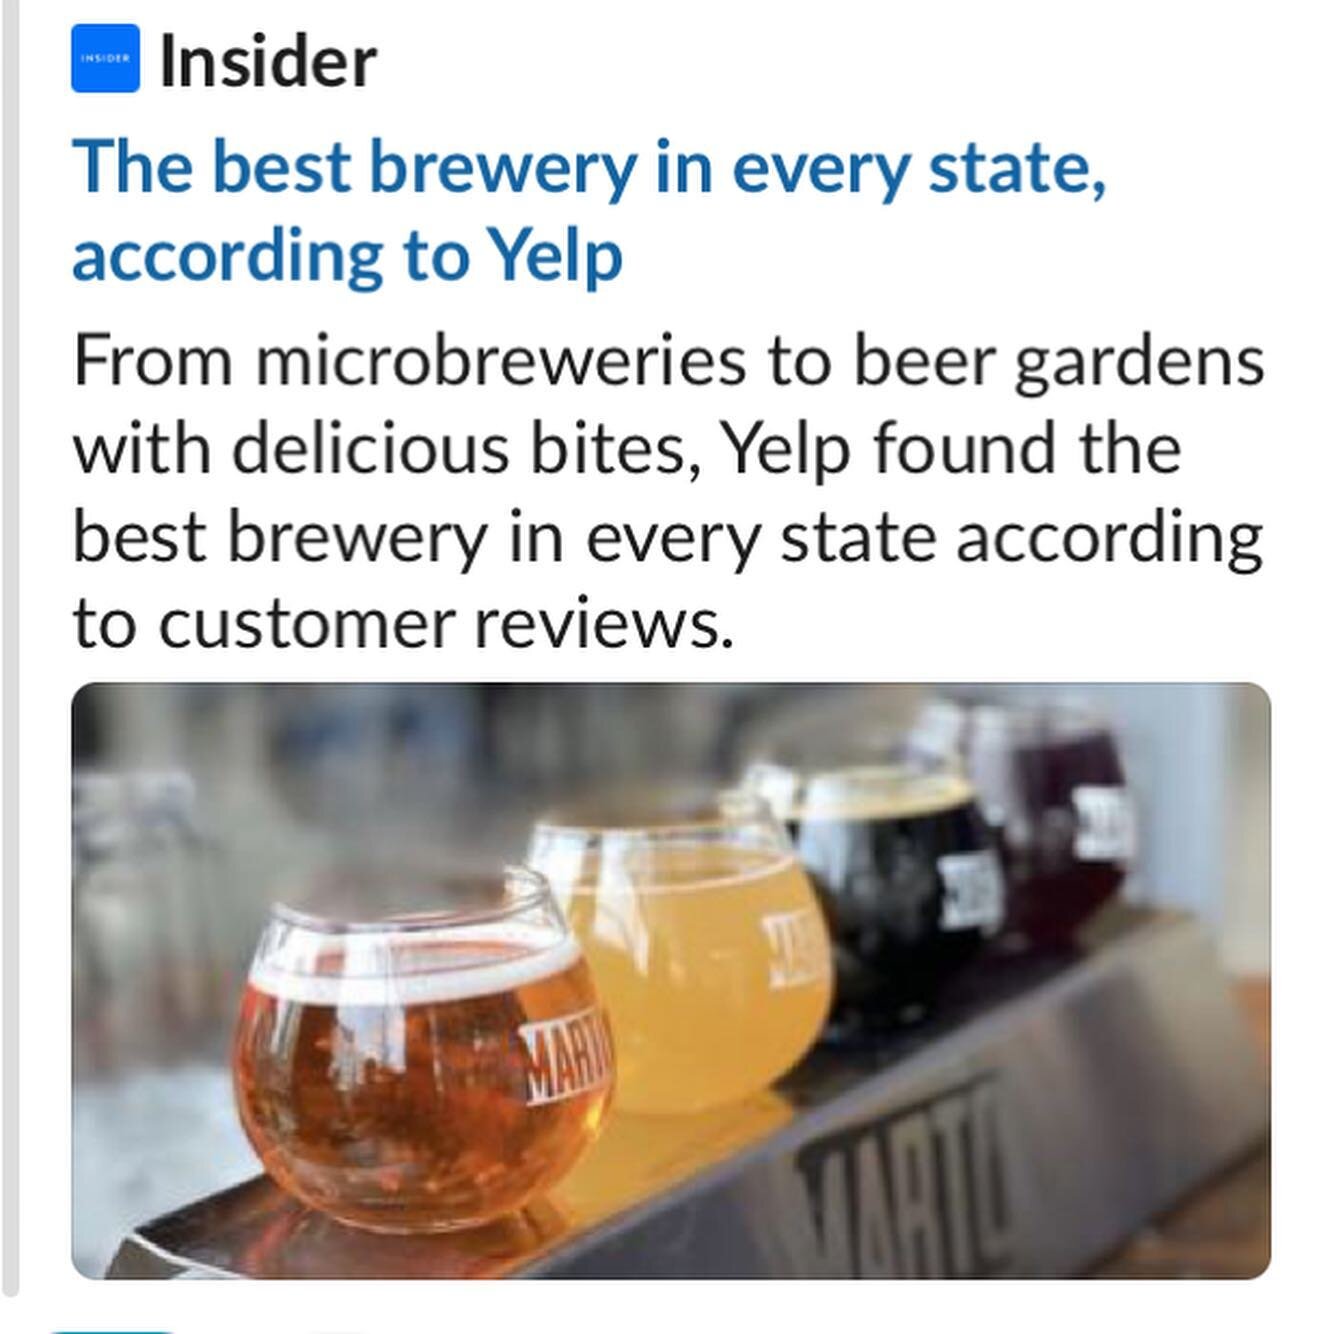 We were recently featured by @insider as having the Best Brewery in New York State!! We just want to thank all our incredible patrons for supporting us these past 7 years. Cheers, NY fam; to many, many more❤️🍻